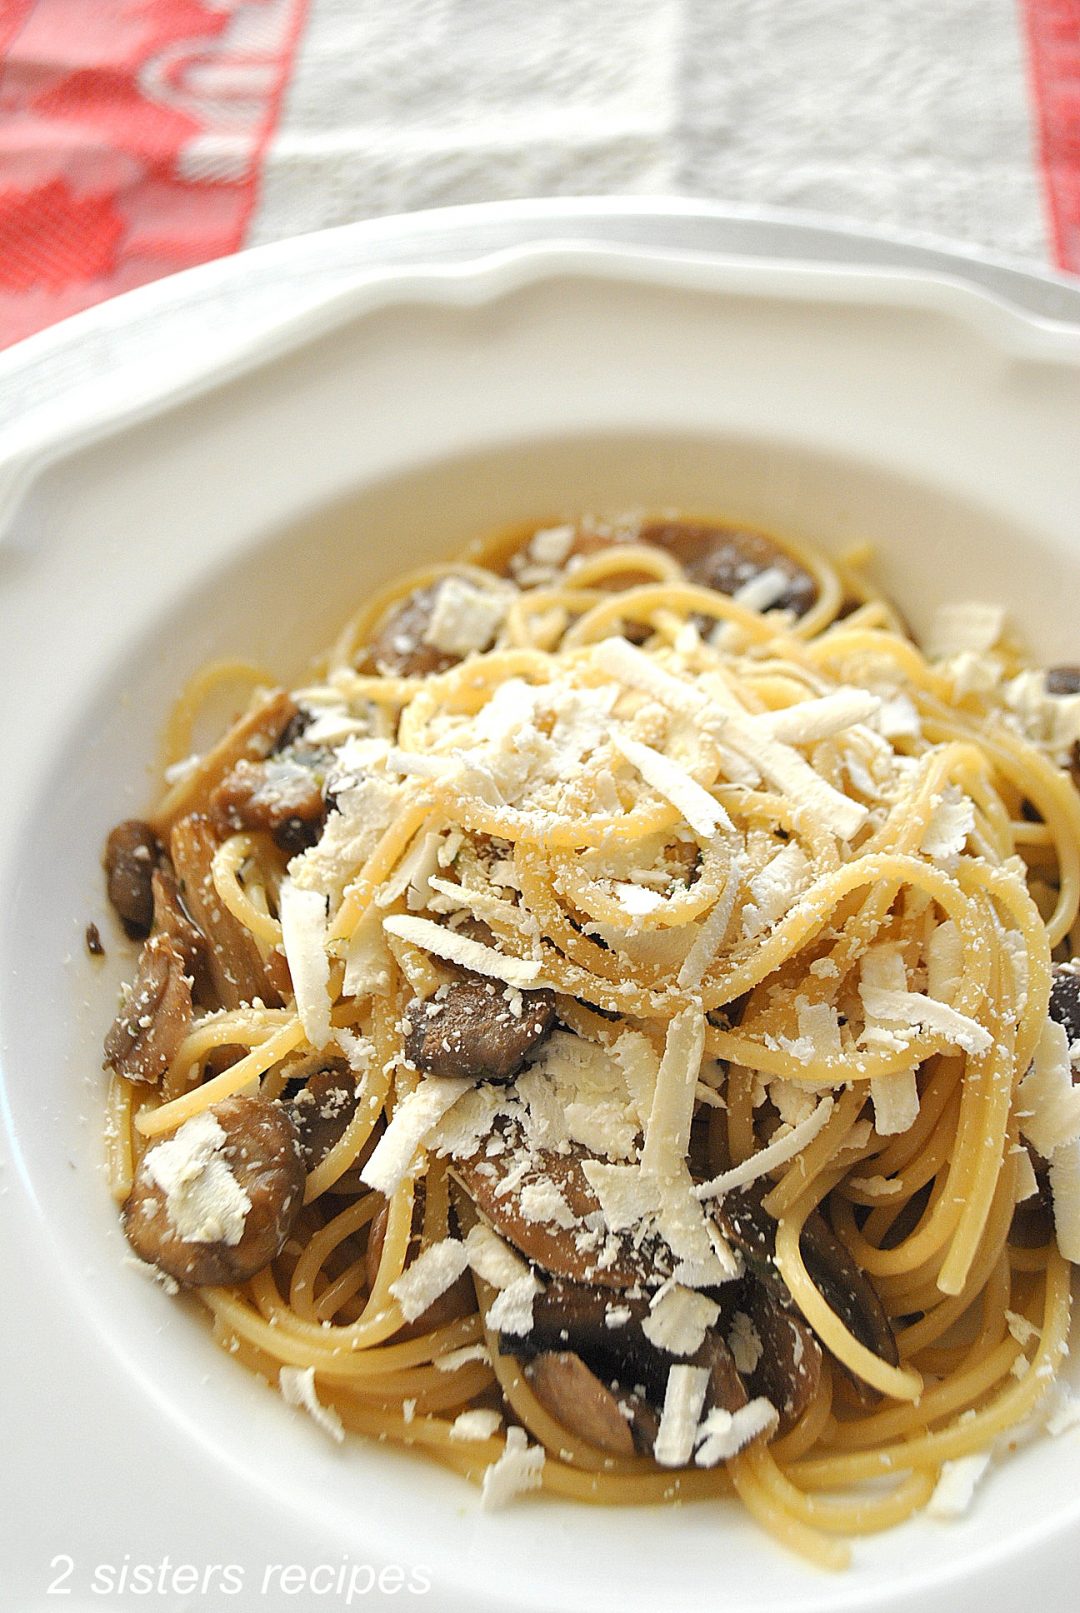 Wild Mushrooms with Cognac and Truffle Oil by 2sistersrecipes..com